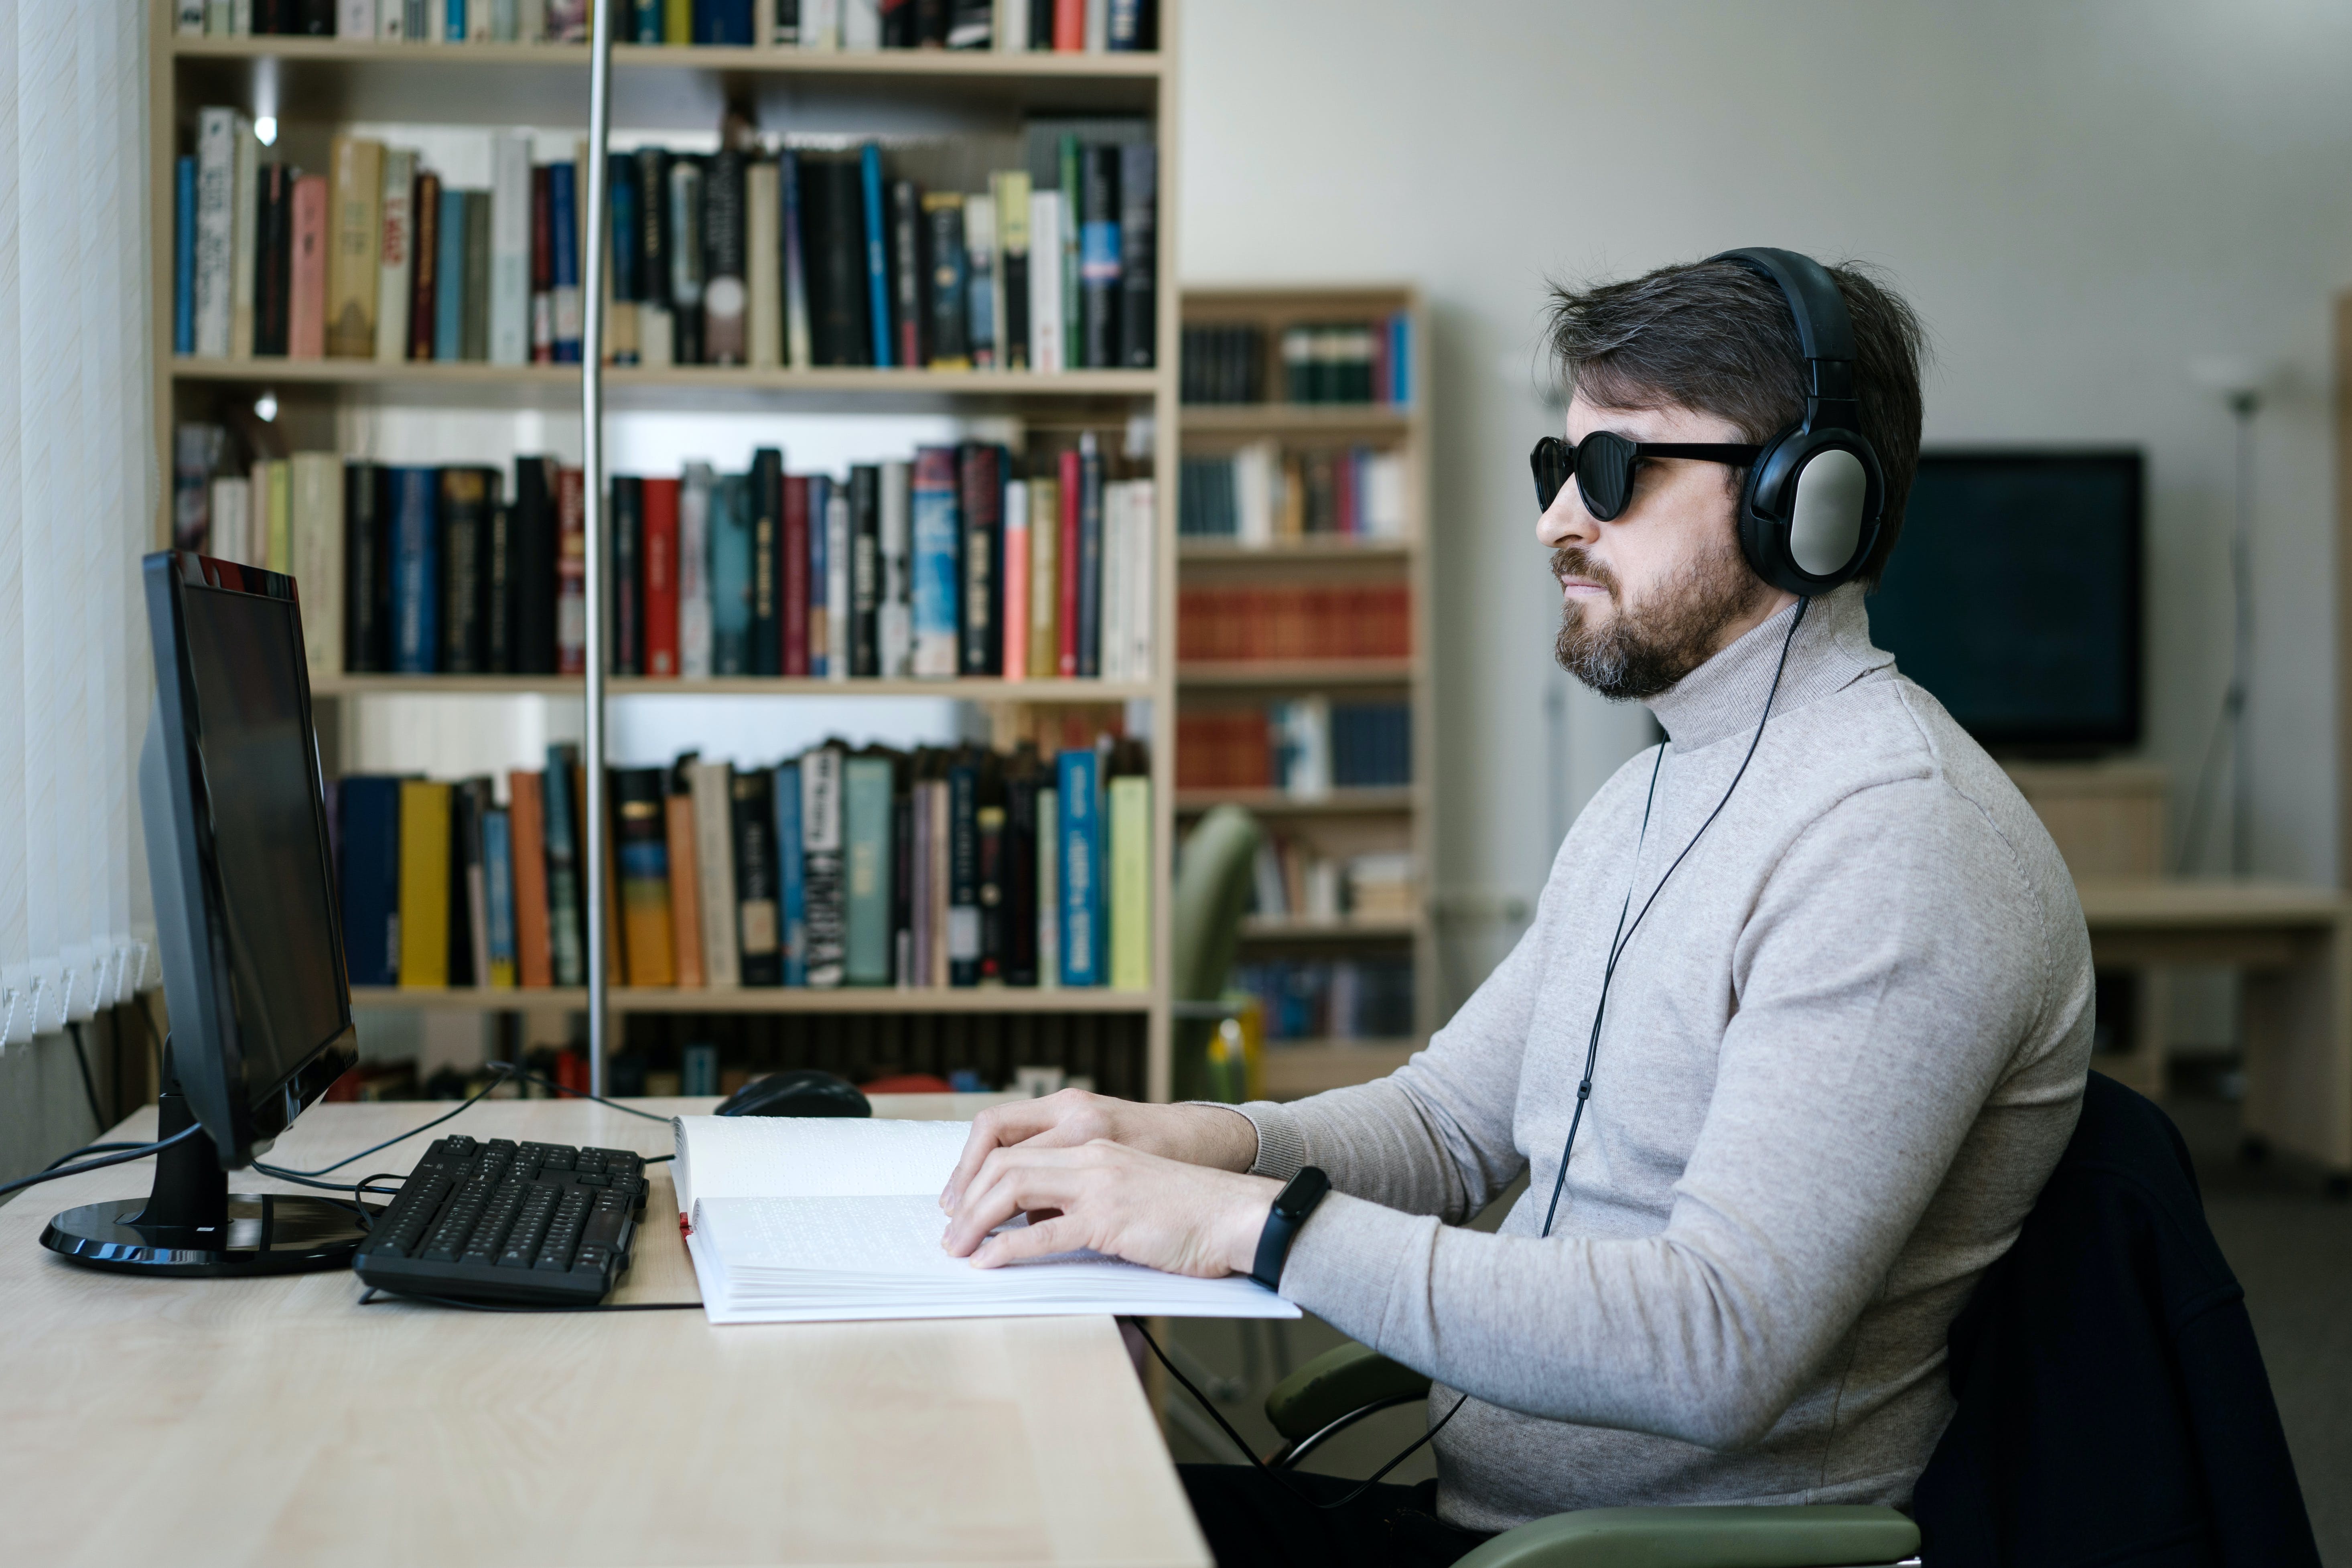 blind person using a laptop and wearing headphones